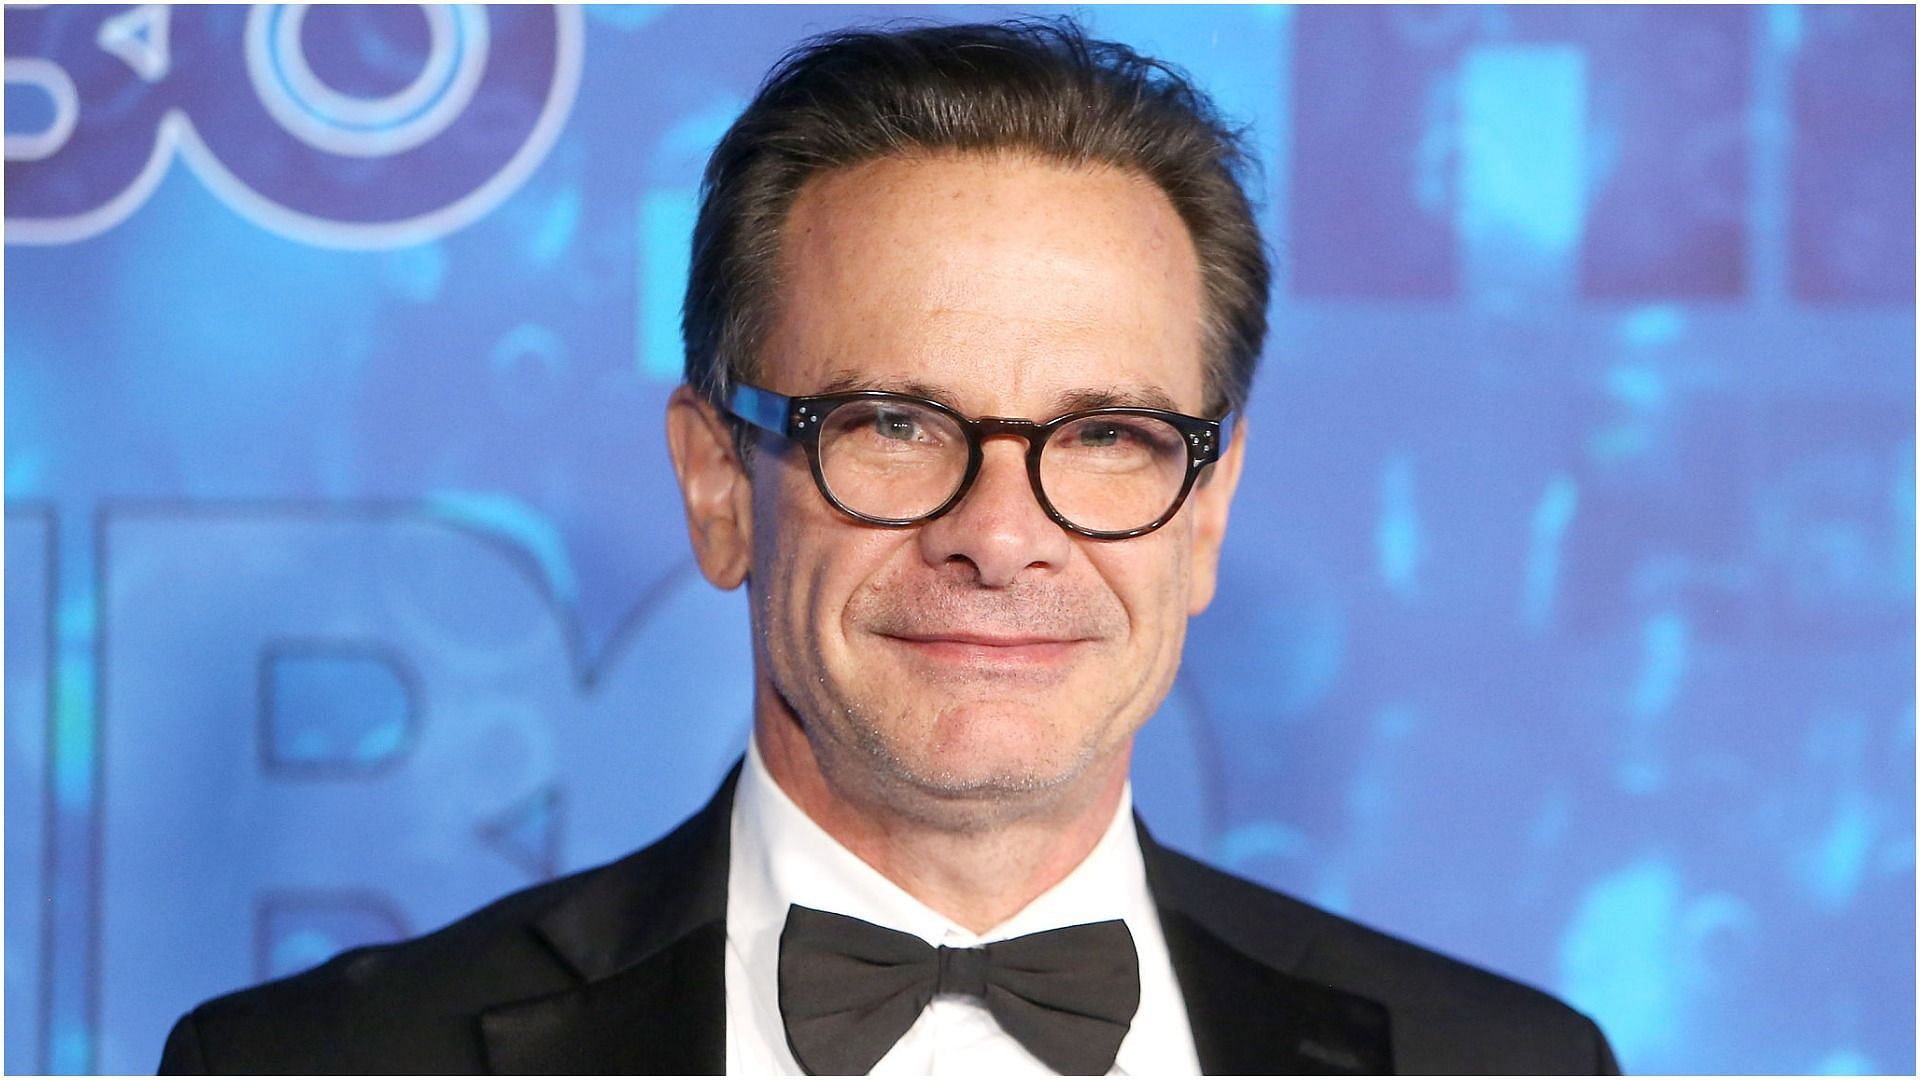 Peter Scolari arrives at HBO&#039;s Post Emmy Awards reception held at The Plaza at the Pacific Design Center on September 18, 2016 in Los Angeles, California. (Image via Getty Images)